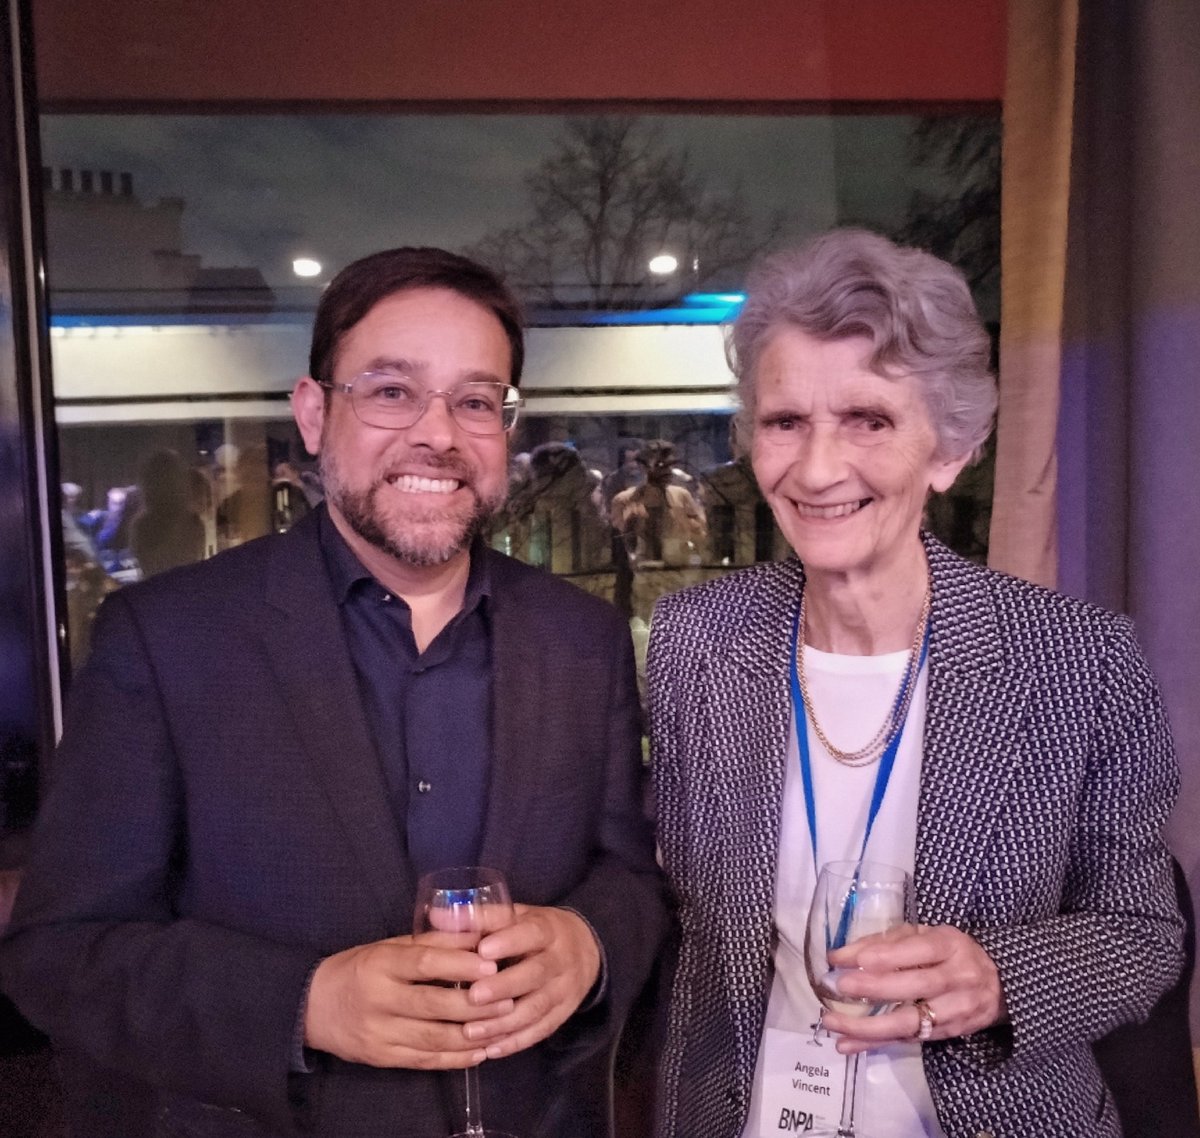 A true legend! Angela Vincent is one of the persons who discovered what we call autoinmune #encephalitis & autoimmune #psychosis, & thus a researcher who changed everyday practice in #Neurology & #Neuropsychiatry I'll keep this photo in case she wins the Nobel prize 😂 @The_BNPA